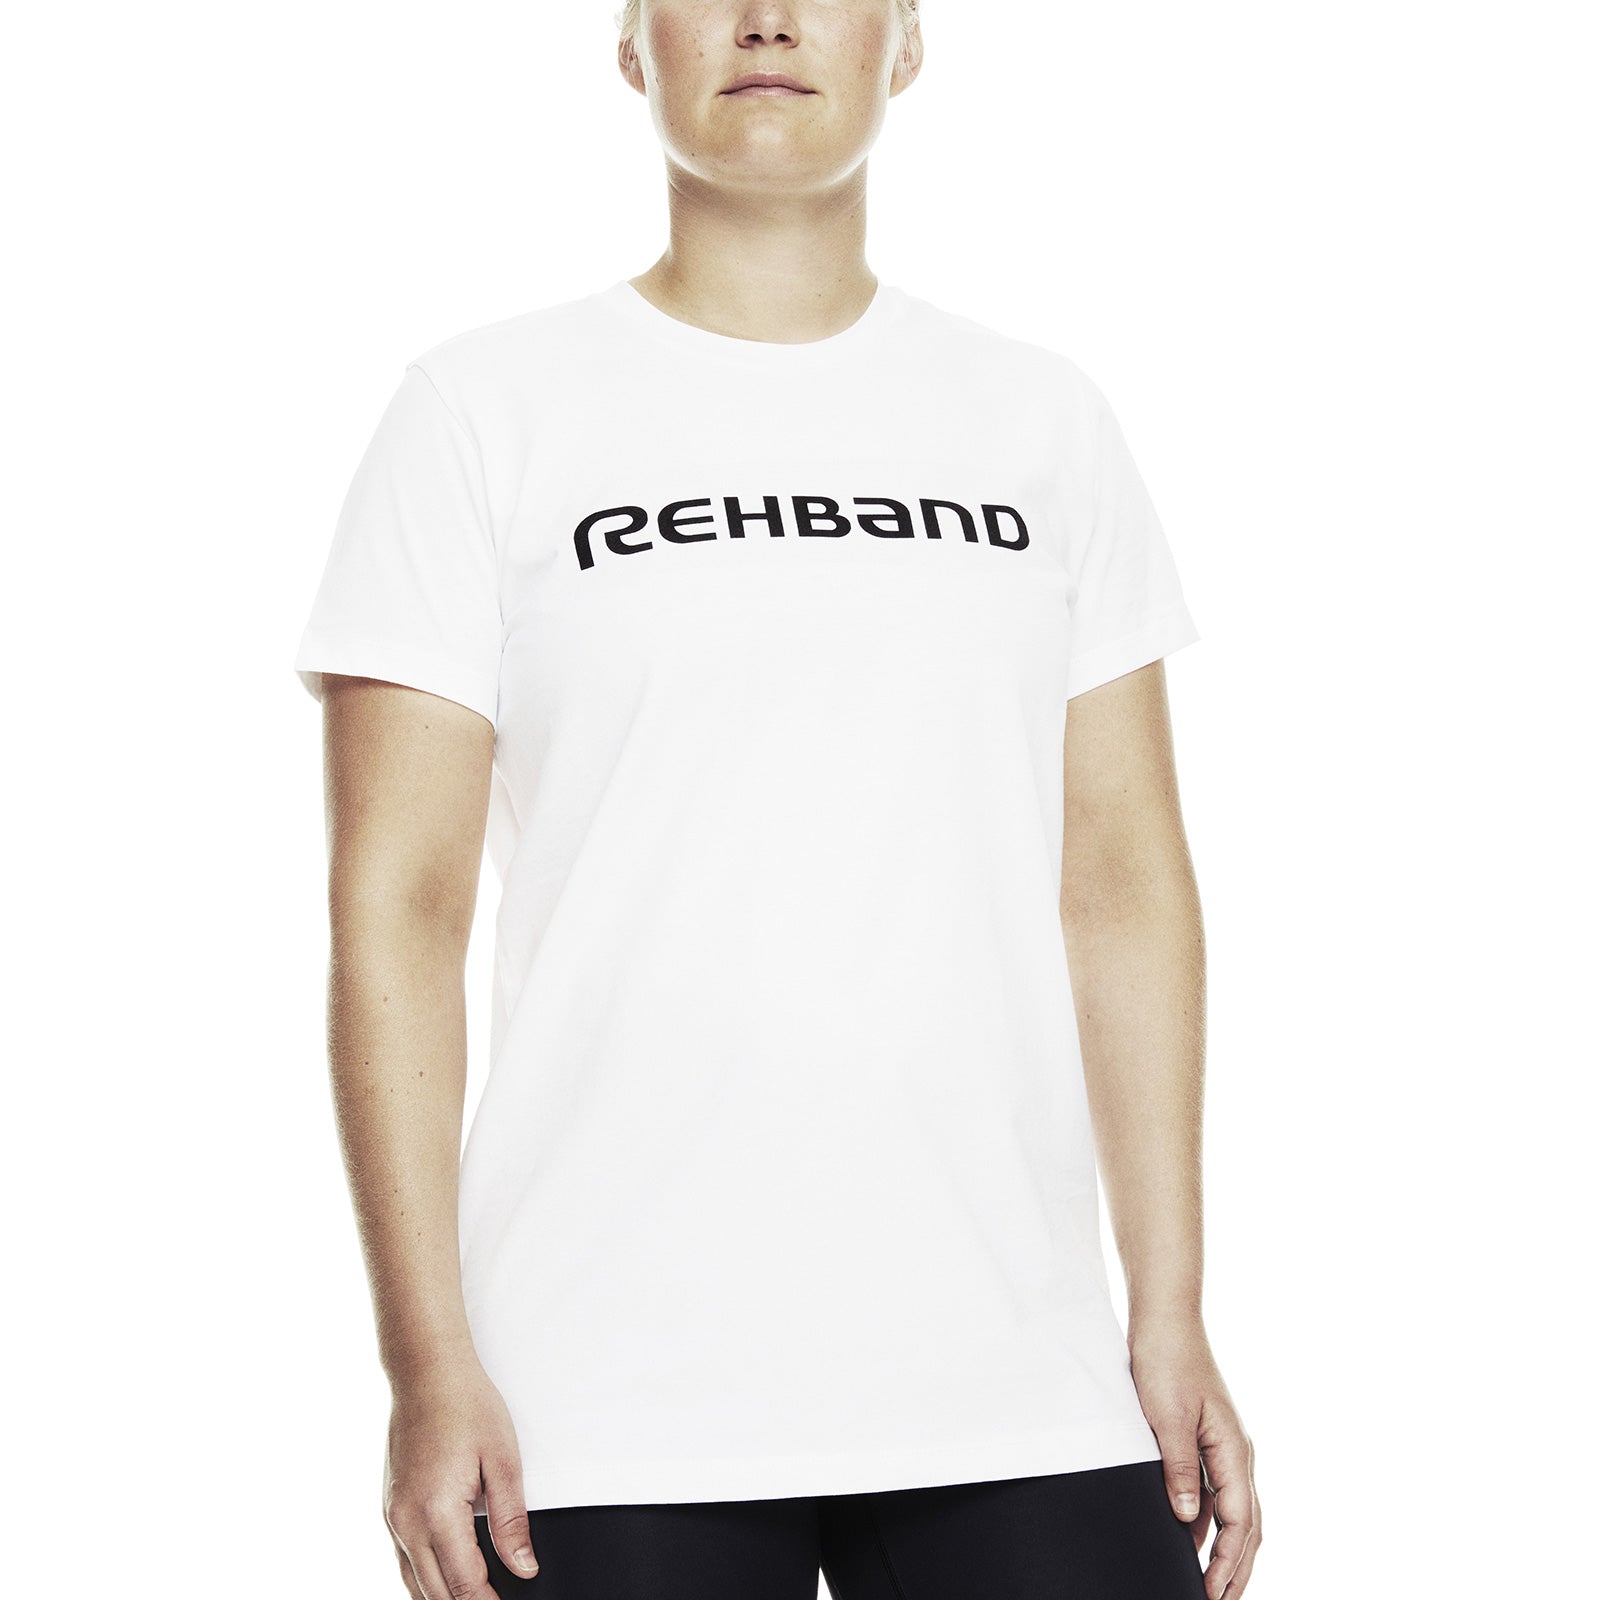 A white t-shirt with a black Rehband lettering in the center